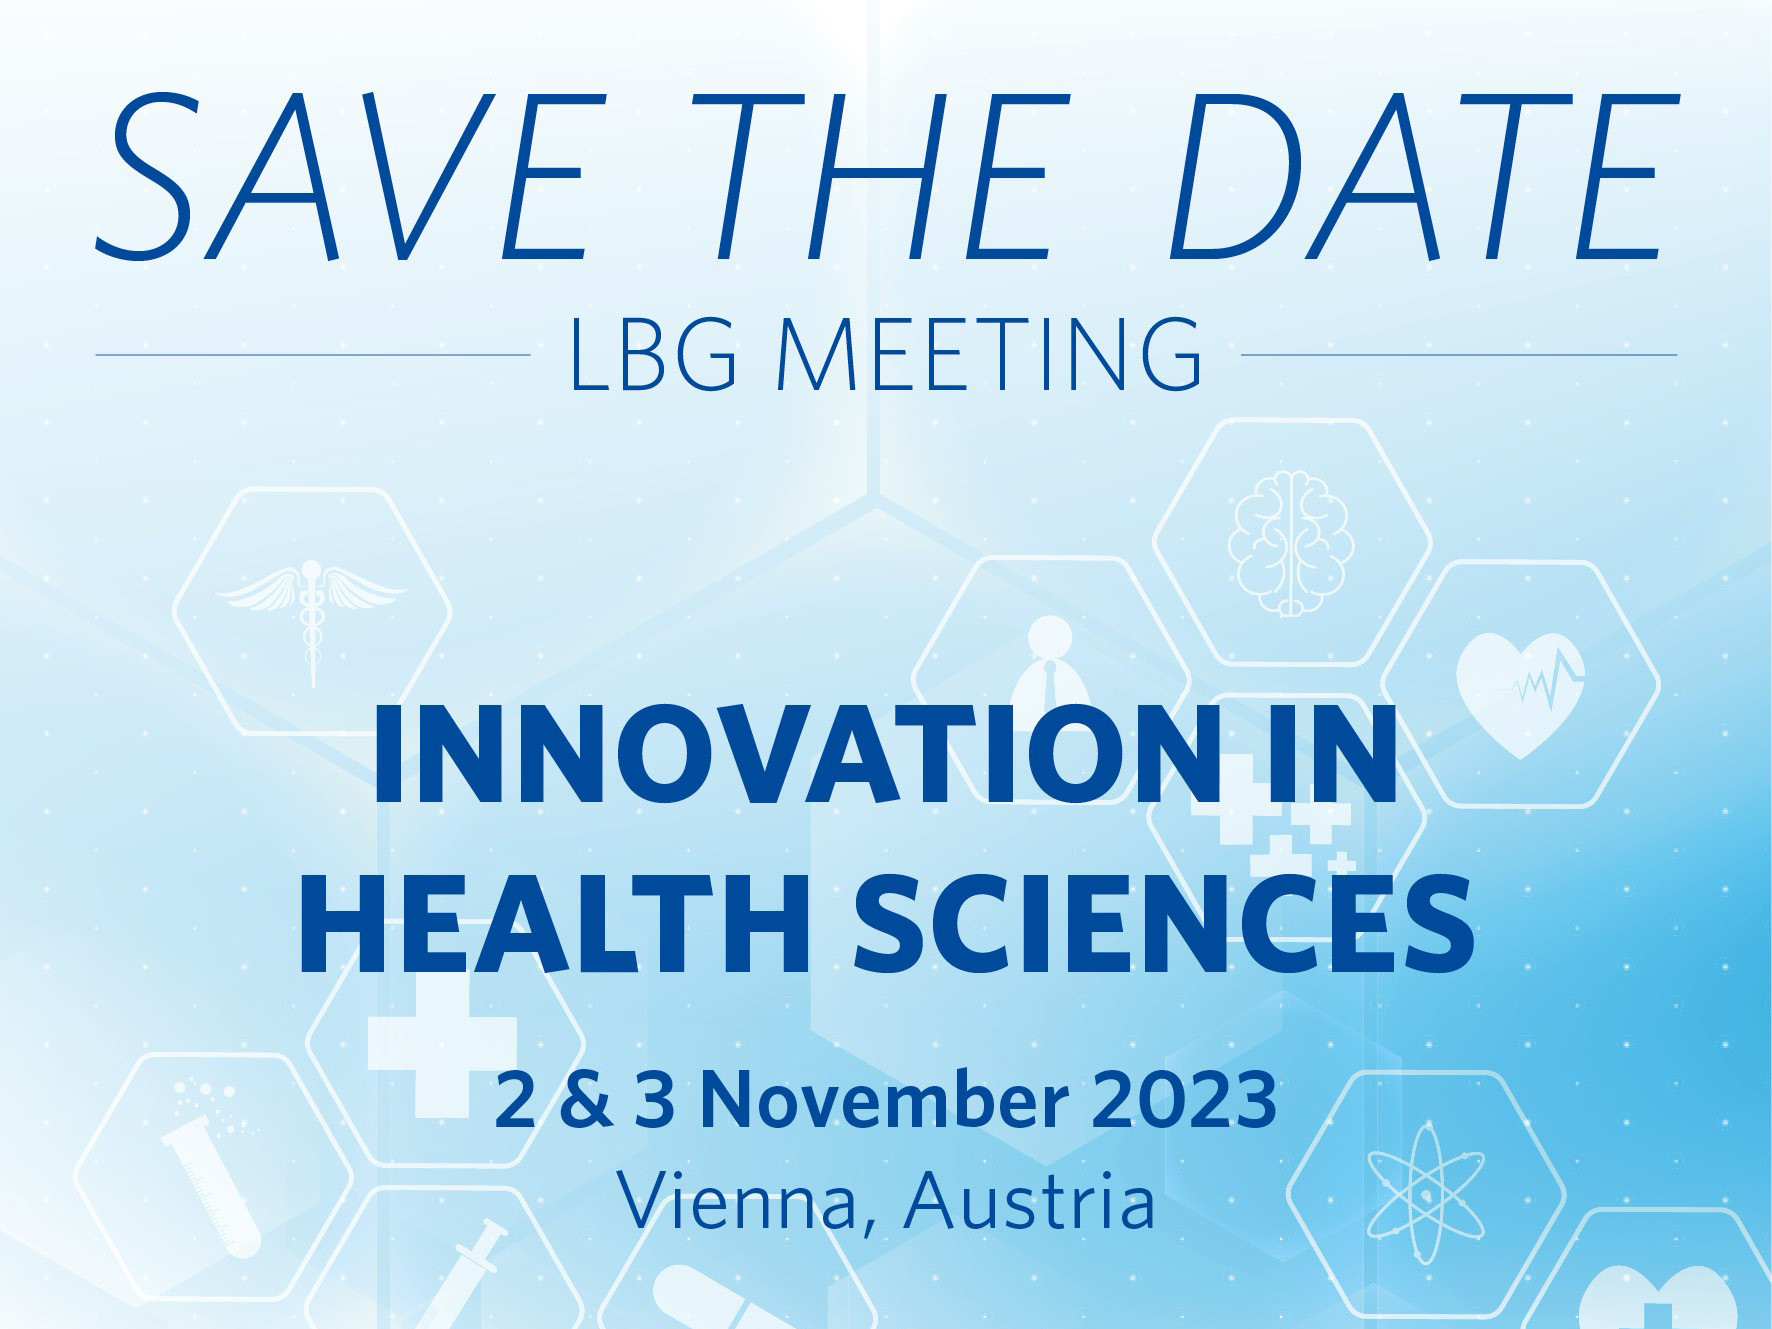 Join the LBG Meeting: Innovation in Health Sciences 2023